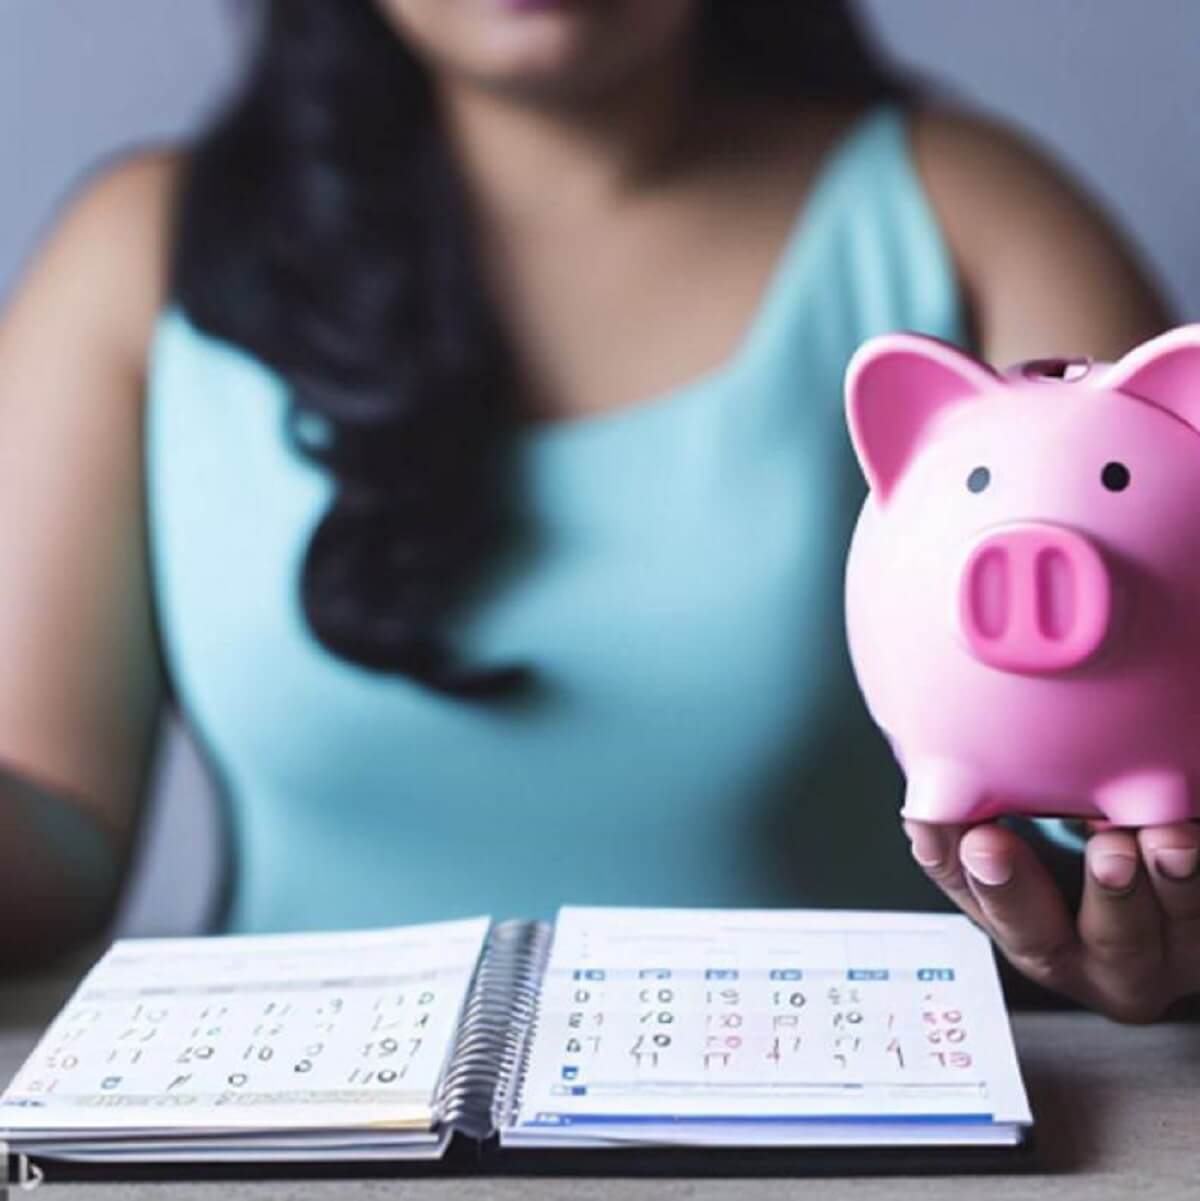 Woman in light blue tank top, holding a pink piggy bank, sitting in front of table with an open notebook on it.